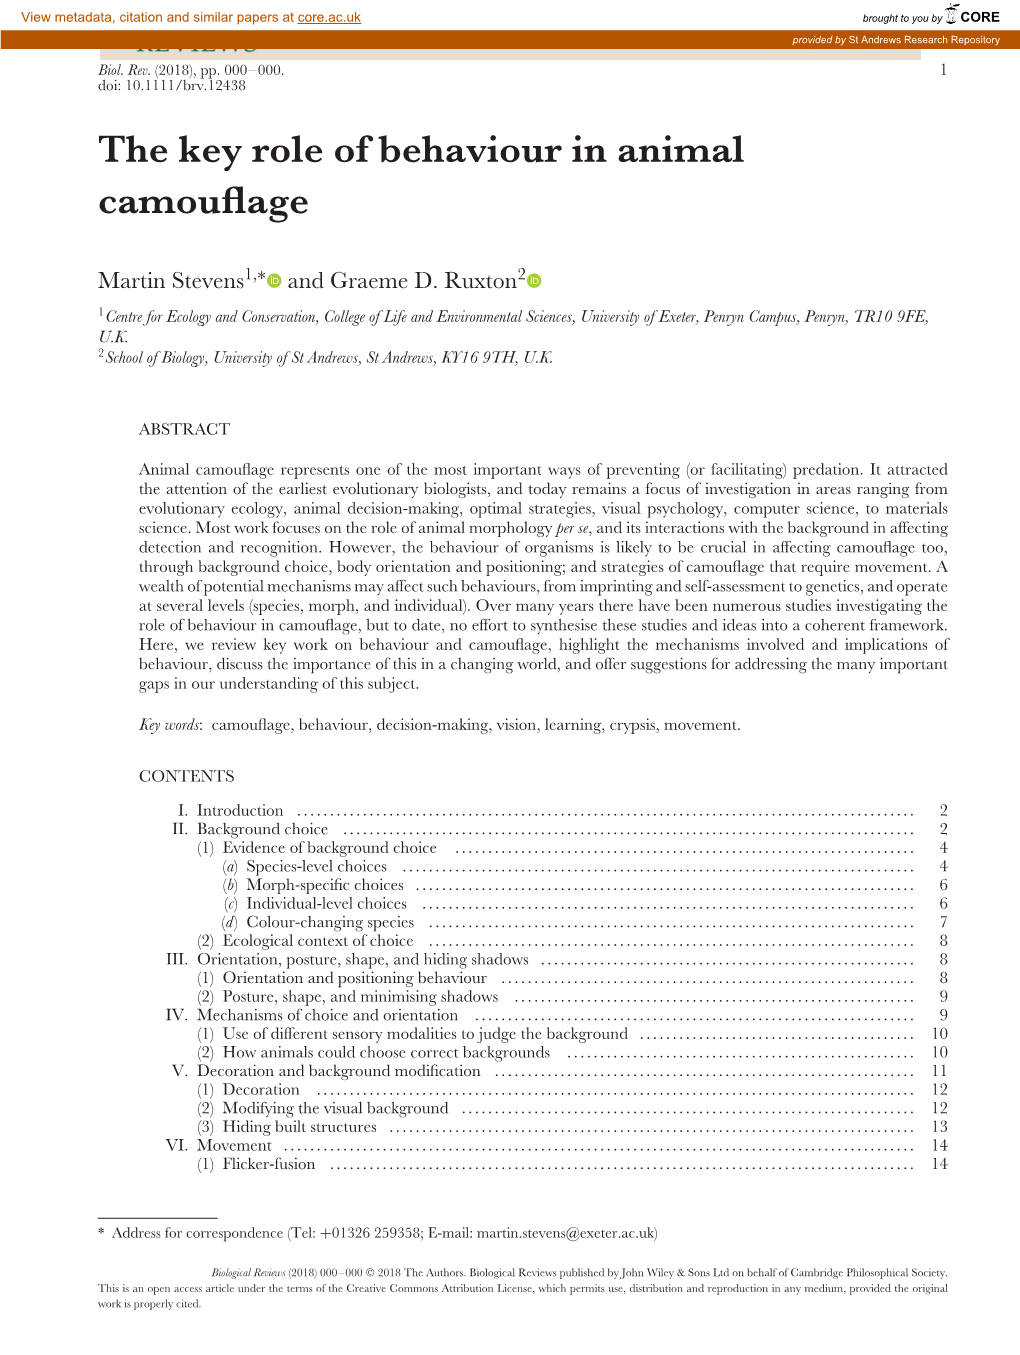 The Key Role of Behaviour in Animal Camouflage